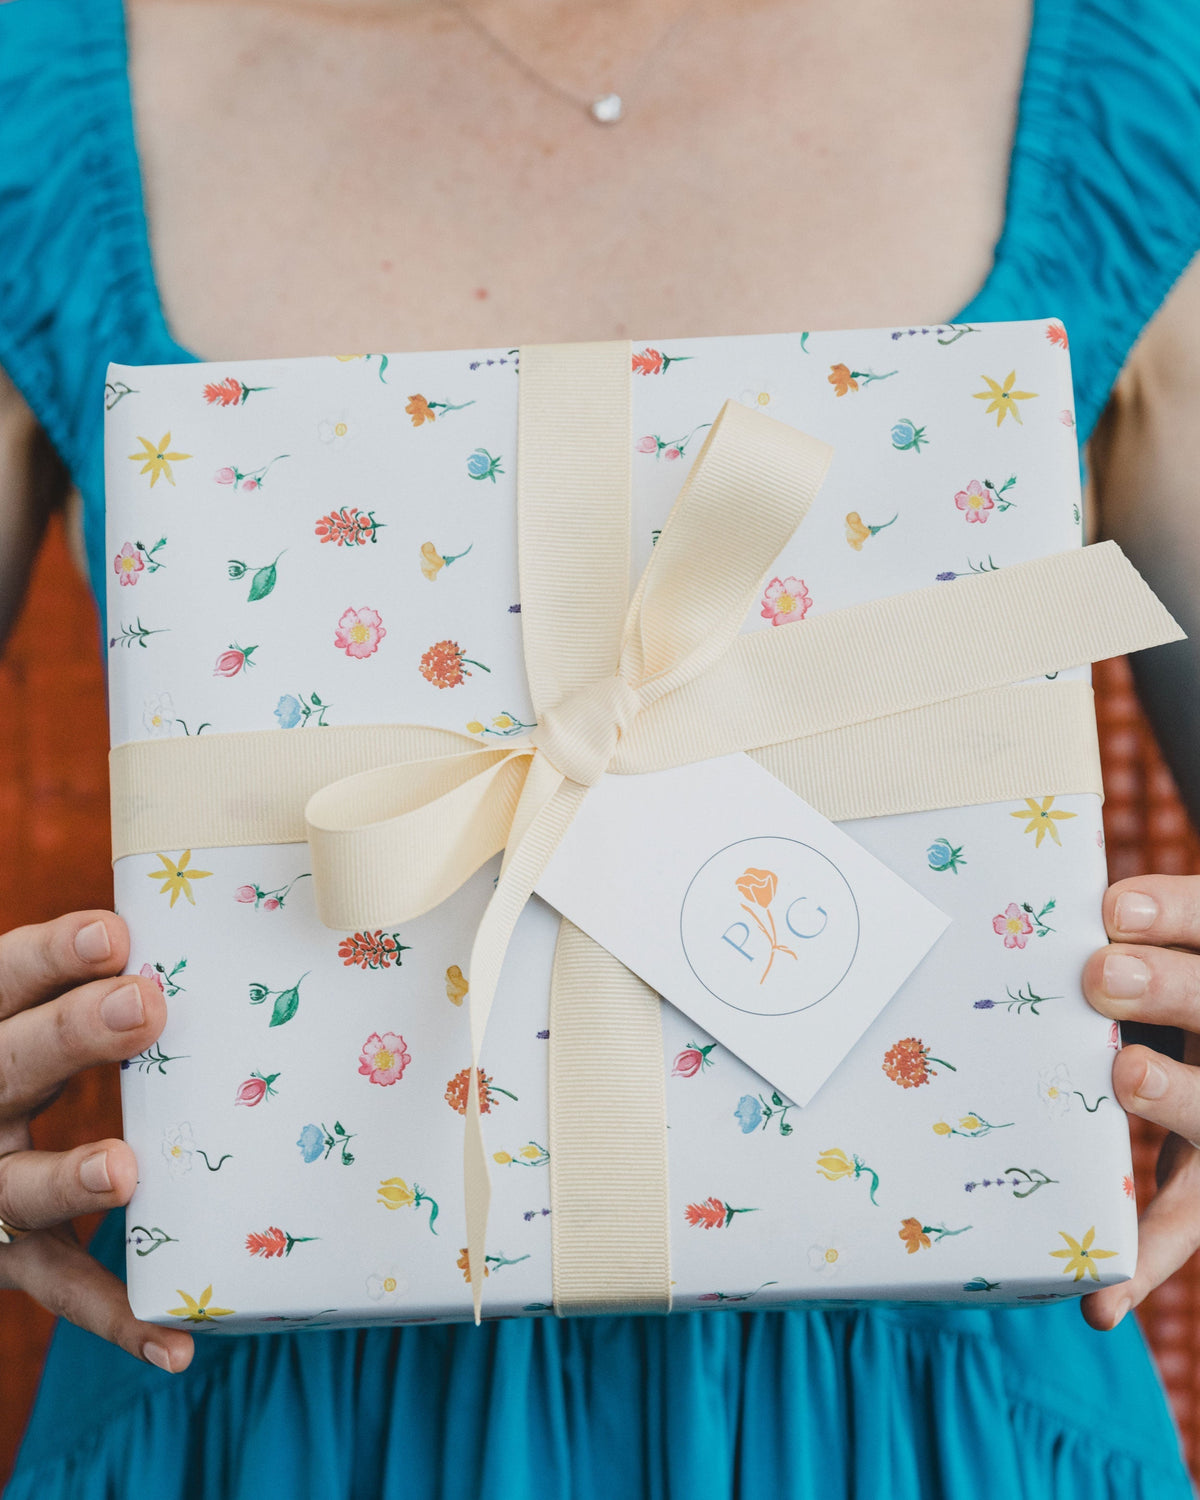 The Gifting Service (Curation &amp; Fulfillment)